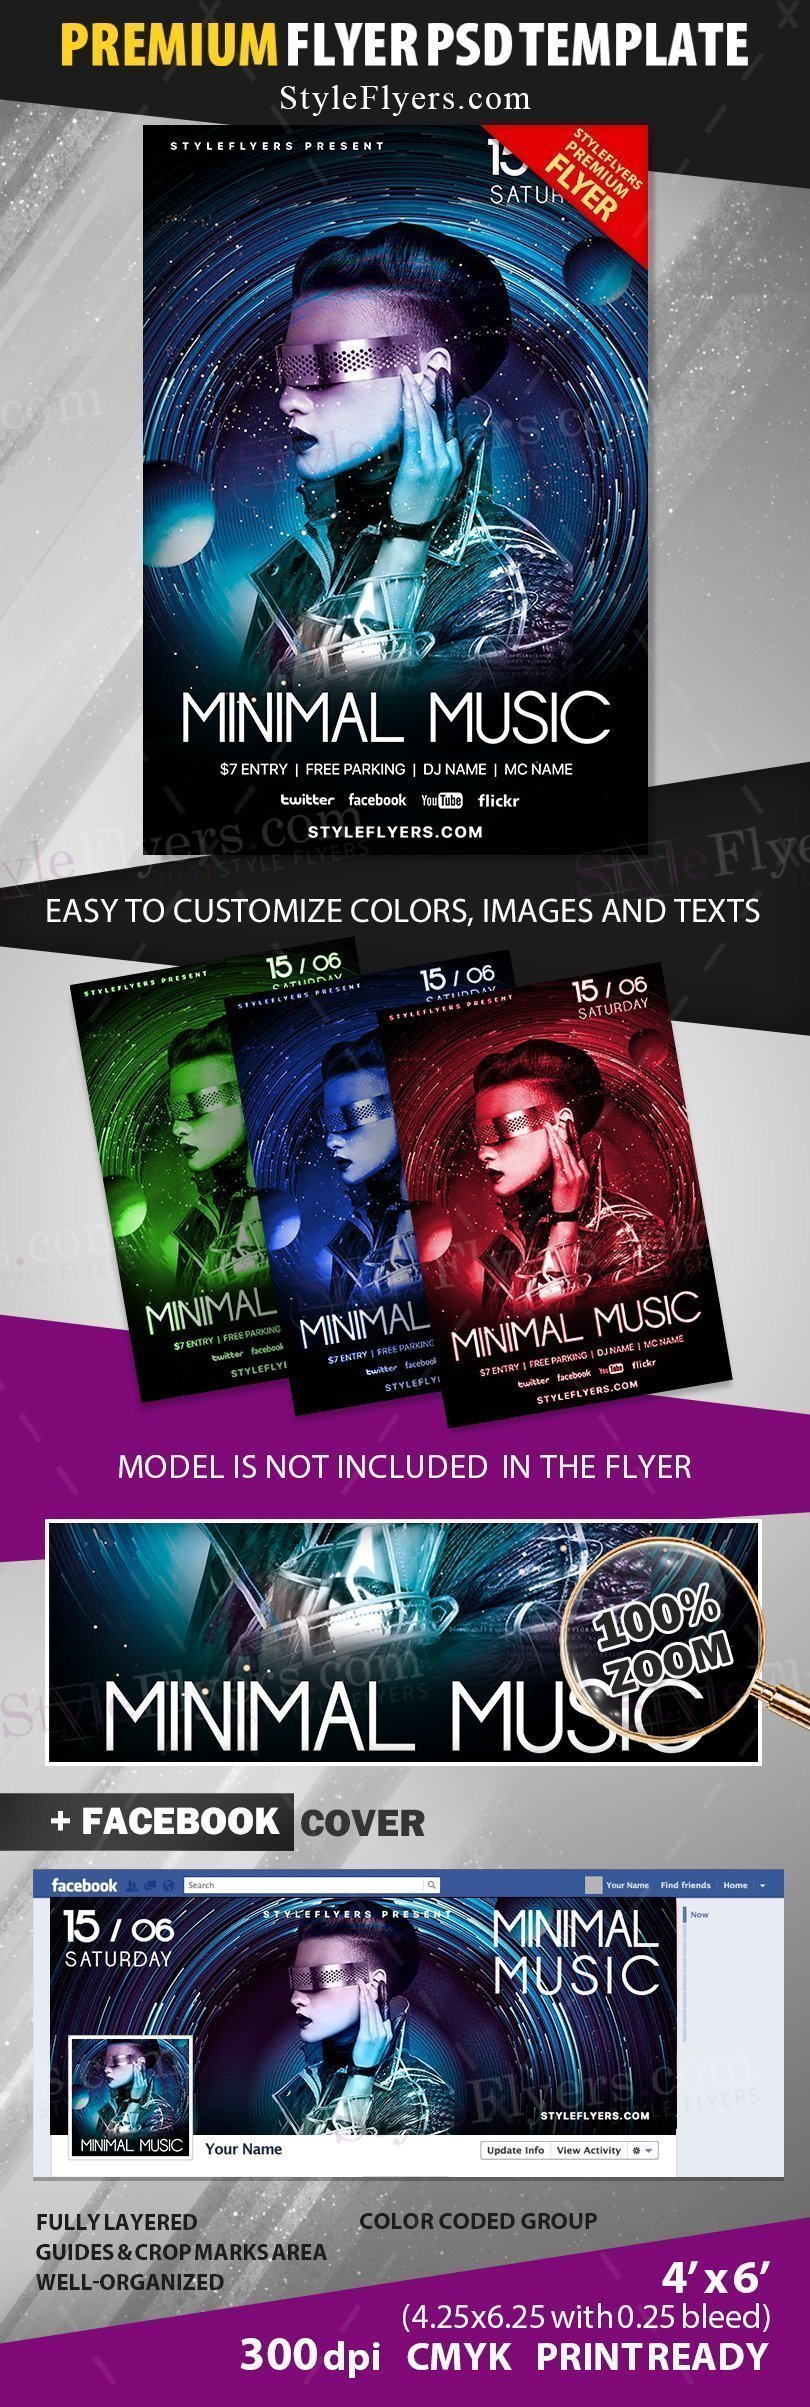 preview_minimal music_psd_flyer